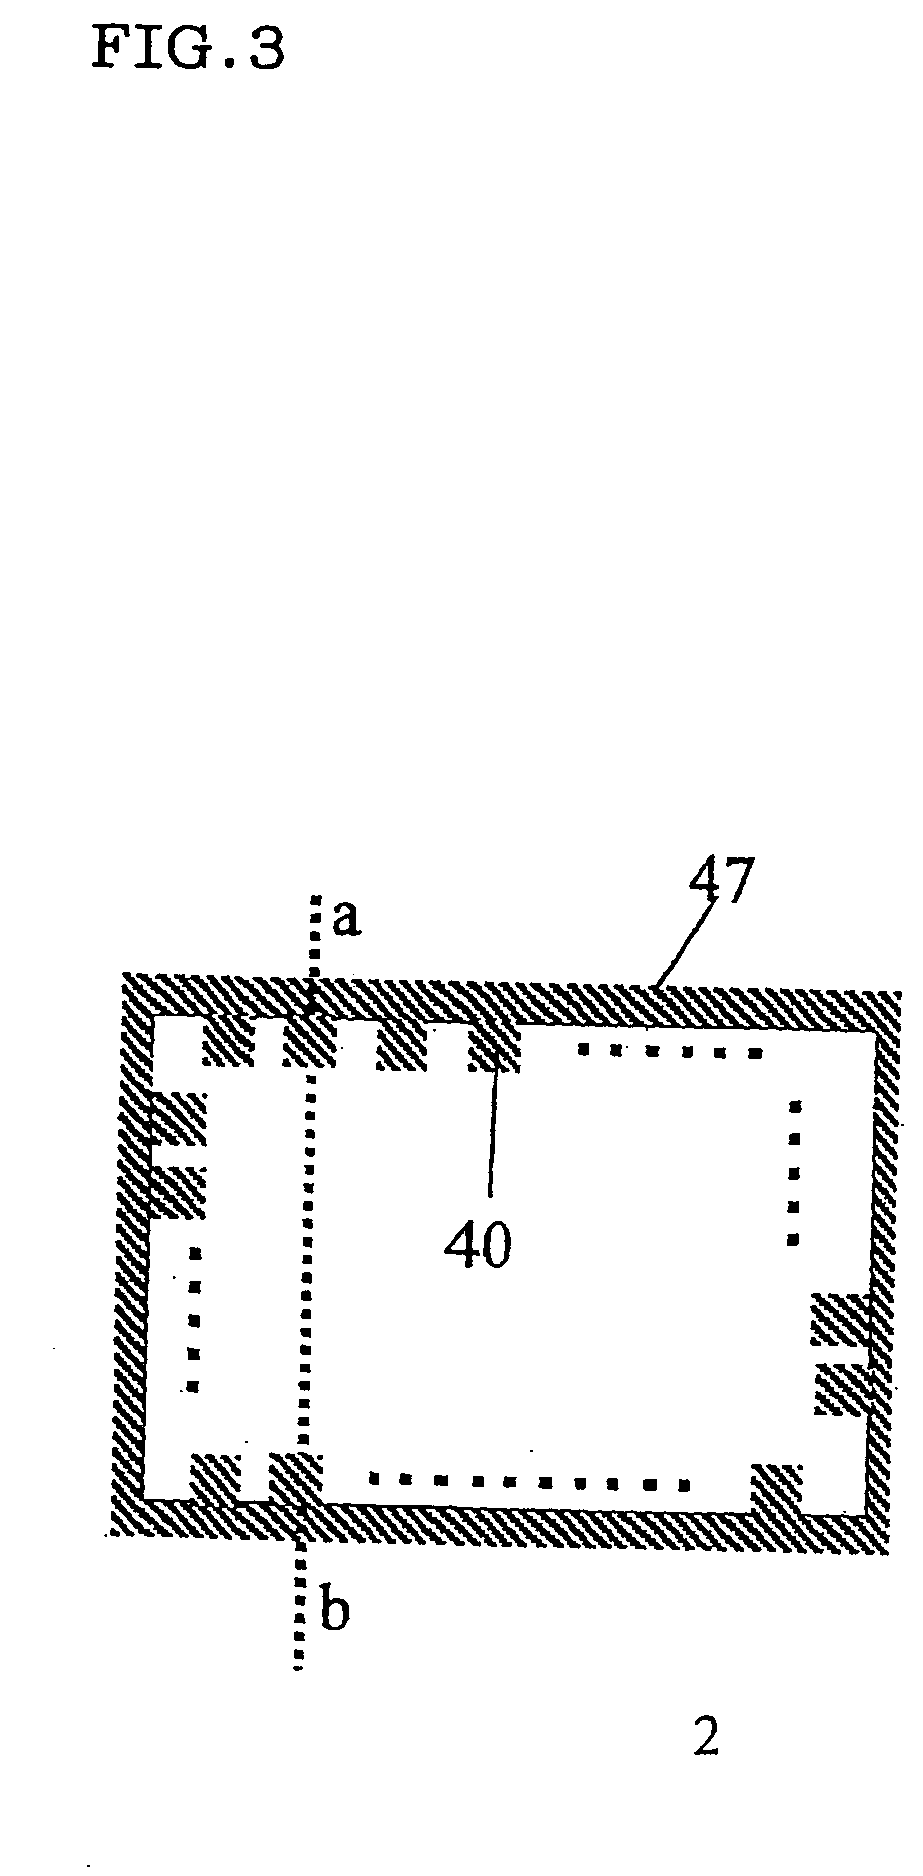 Method for manufacturing Semiconductor device, adhesive sheet for use therein and semiconductor device